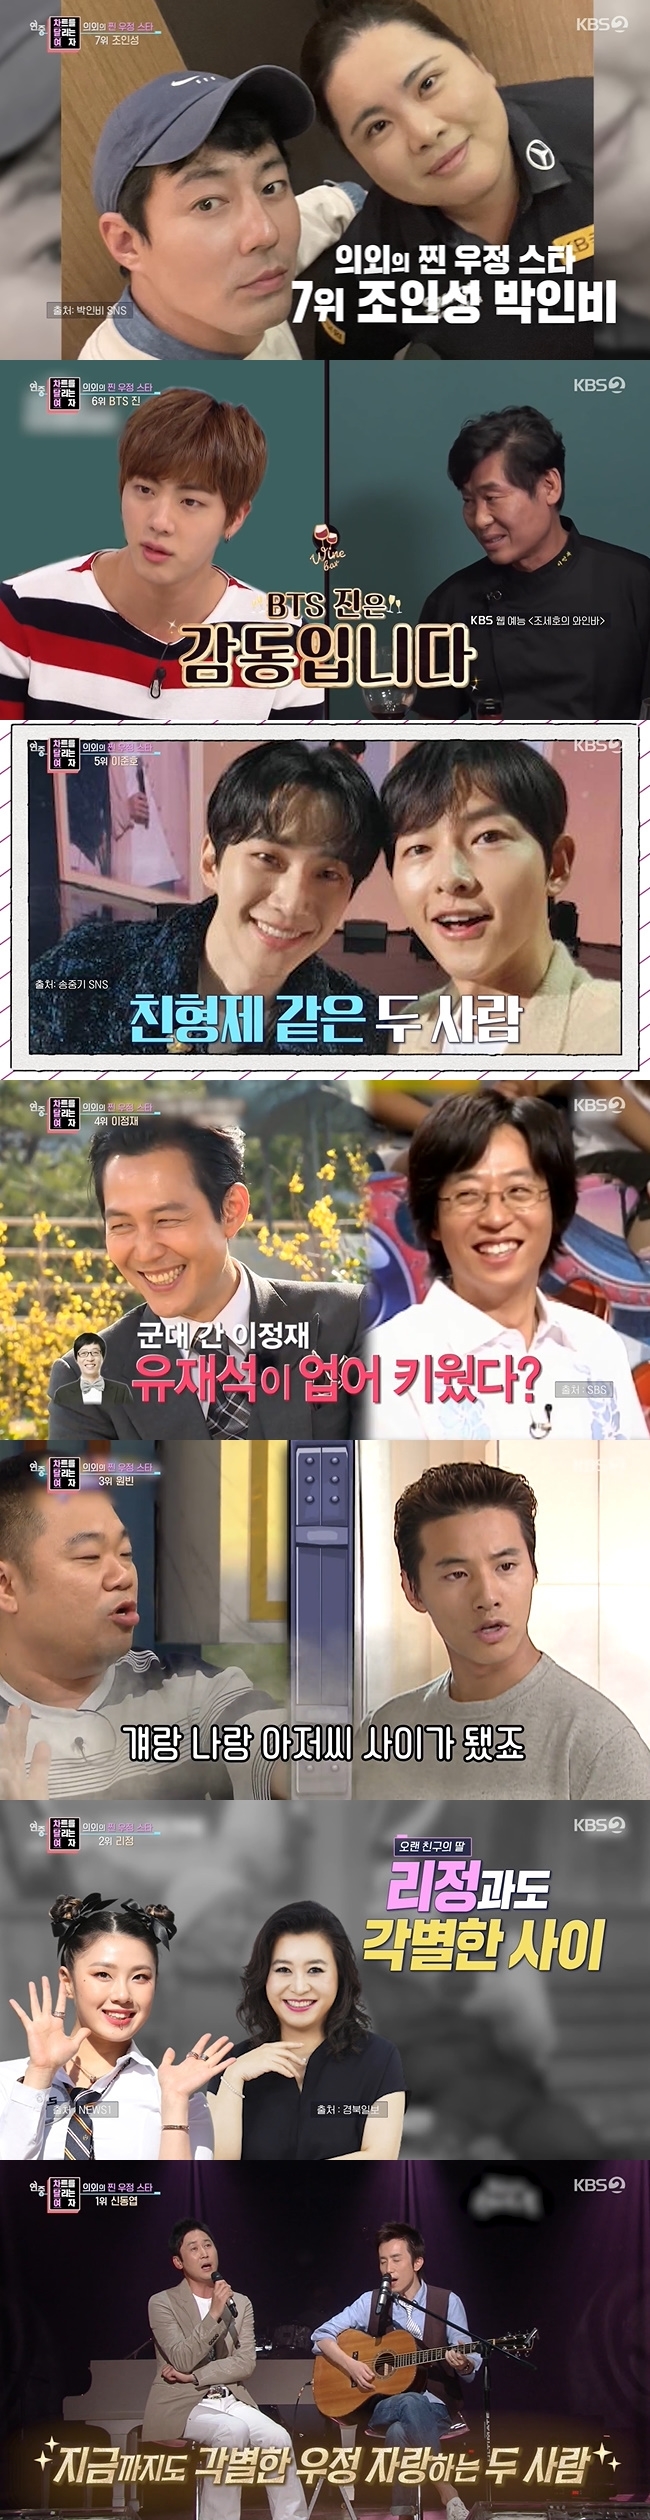 The Chinese couple, Hyun Bin and Son Ye-jin, who had gathered topics with the marriage of the century, had to be popular among Honeymoon.On KBS 2TV The Year Live broadcast on April 21, the marriage of Hyon Bin and Son Ye-jin was mentioned through the SNS News corner.Kim Sang-kyung, Lee Sun-bin, Seo Young-hee and Yun Jing, who appeared in the movie Air Murder at the corner of Love The Year, expressed their responsibility for the story based on the actual humidifier disinfectant case and asked for attention.Jo In-seong was placed seventh.Even though he is a close friend known as Jo In-sung Family, such as Lee Kwang-soo, Do Kyung-soo, Lim Joo-hwan and Kim Woo-bin, Jo In-sung is also a close friend of Park In-bee, a gold medalist at the 2016 Rio Olympics.Park In-bae, who is known as a long-time Jo In-sung fan, meets Jo In-sung for the first time at a premiere and travels with his Husband, Nam Ki-hyeop, to the United States.BTS Jean, who ranks sixth, is continuing Friendship beyond the age of 33, even Lee Yeon-bok chef.Jin, who met in a program and started a relationship with Lee Yeon-bok chef, is presenting his own strawberry and wine seller and is in a relationship with fishing.2PM Lee Joon-ho and Song Joong-ki, who ranked fifth, have been building friendship for 13 years by meeting at the Departure Dream Team at the beginning of their debut.They are making surprise guests at each others fan meetings, and they are sending coffee tea to their own studios. Song Joong-ki said, I want to meet you in one piece somehow.I want to meet him as a brother in Drama on the weekend, and I want to play a brother who does not listen to him. Lee Jung-jae and Yo Jae-Suk, who had a defense career in 1994, climbed to fourth place.In the past, Yoo Jae-Suk went to Lee Jung-jaes house, which was not good in the morning, woke him up and put on military uniforms to go to work.Lee Jung-jae praised the broadcast, saying, The department should plan the performance, but Jae-seok did it. He felt that he was very talented.The third place was ranked by 77-year-old One Bin and Jong-cheol Jung, who came close to each other through their common interests, soccer and soccer games.When asked if he often contacted Onebin, Jung Jong-cheol, who appeared in Happy Together in the past, said, When I was in contact, I talked about Lets get together and shot the movie The Man from Nowhere.After that, I became acquainted with him and I, and I became acquainted with him. Currently, Jung Jong-chul became a close friend of Ryu Seung-ryong with a common denominator of woodworking.Lee, who came in second, has been in a special relationship with his father, Dr. Oh Eun-young, for 50 years.I did an IQ test at Dr. Oh Eun-youngs disease when I was a baby, and when I saw him analyzing the data on me, I thought it was you and called you Dr. Oh from then on.Shin Dong-yeop, who came in first place, has been in the relationship with You Hee-yeol and from elementary and junior high school to entertainment colleagues.The two of them were in the broadcasting group during their school days, and Shin Dong-yeop, who became a comedian first, made You Hee-yeol as a radio fixed guest and started broadcasting.You Hee-yeol also made her singer debut formally.In the SNS News corner, the story was reexamined from the marriage of the Hyun Bin and Son Ye-jin couple who gathered topics on SNS.The two people who appeared at the airport to go on a honeymoon to the United States recently appeared at the airport at first, as if they were conscious of the reporters, but they showed affection after joining the departure hall.The pair then arrived at an airport in Los Angeles, and a slew of fans flocked to see the pair.Son Ye-jin was embarrassed by the sudden crowd, such as requesting a photo, and Hyon Bin showed protection of Son Ye-jin while talking.The marriage ceremony of the two people who warmed up the SNS was followed by the celebration of Oh Yoon-a and his fellow entertainers, and the designer of the luxury brand V company also congratulated the talented young couple on the official SNS.Happiness will be together in a new life. In addition to this, on the same day, marriage boom and sleepy, the daughter of actor Jang Kwang, the marriage of Mizawa Kim Tae Hyun, and the marriage of April 26th, Park Gun and Han Young couple were mentioned.